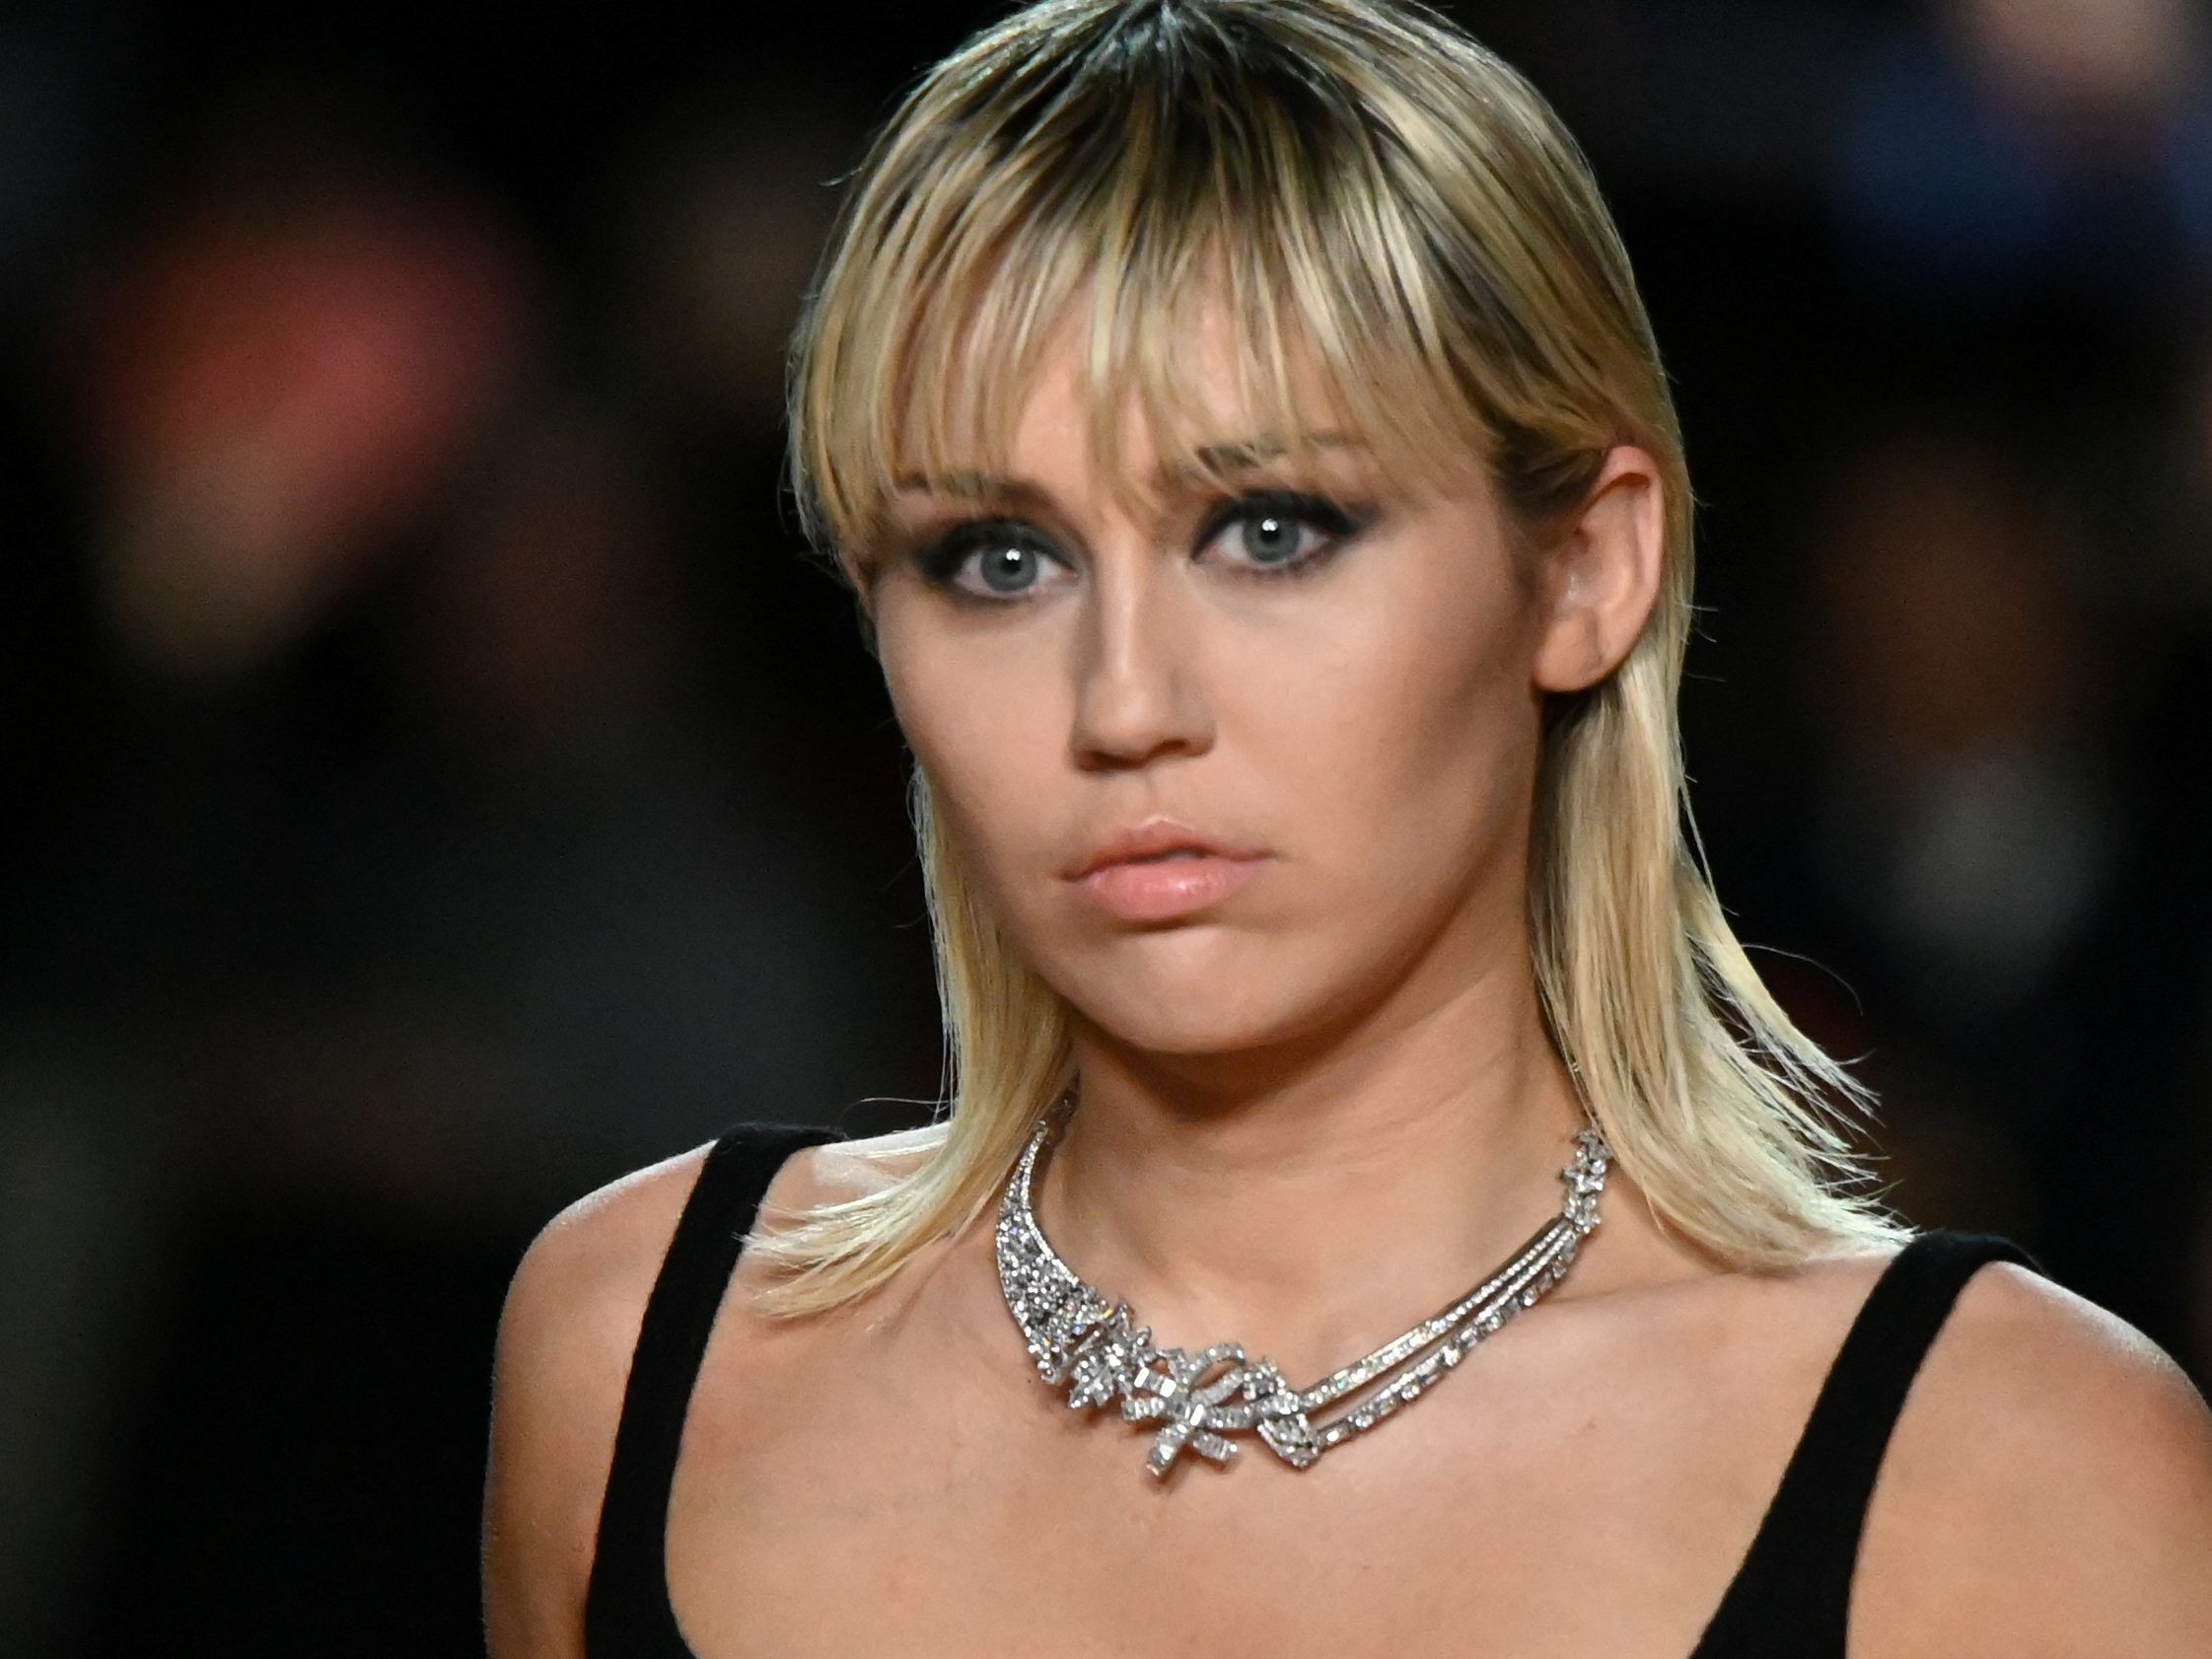 Miley Cyrus shares X-rated 'nip slip' pic on Instagram